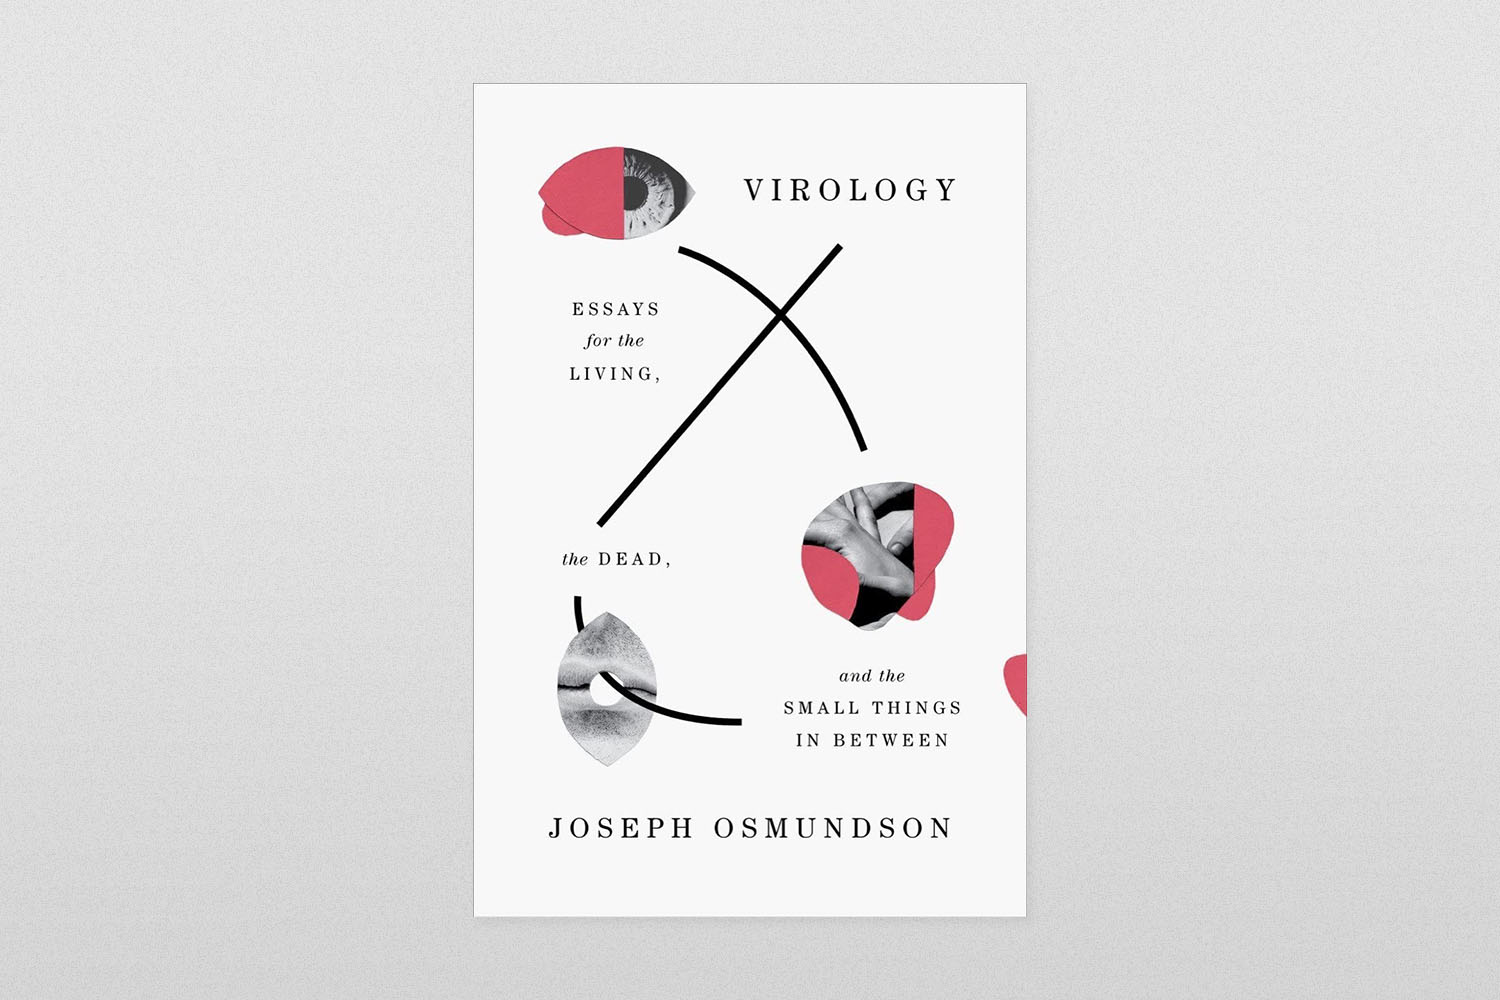 Virology- Essays for the Living, the Dead, and the Small Things in Between by Joseph Osmundson